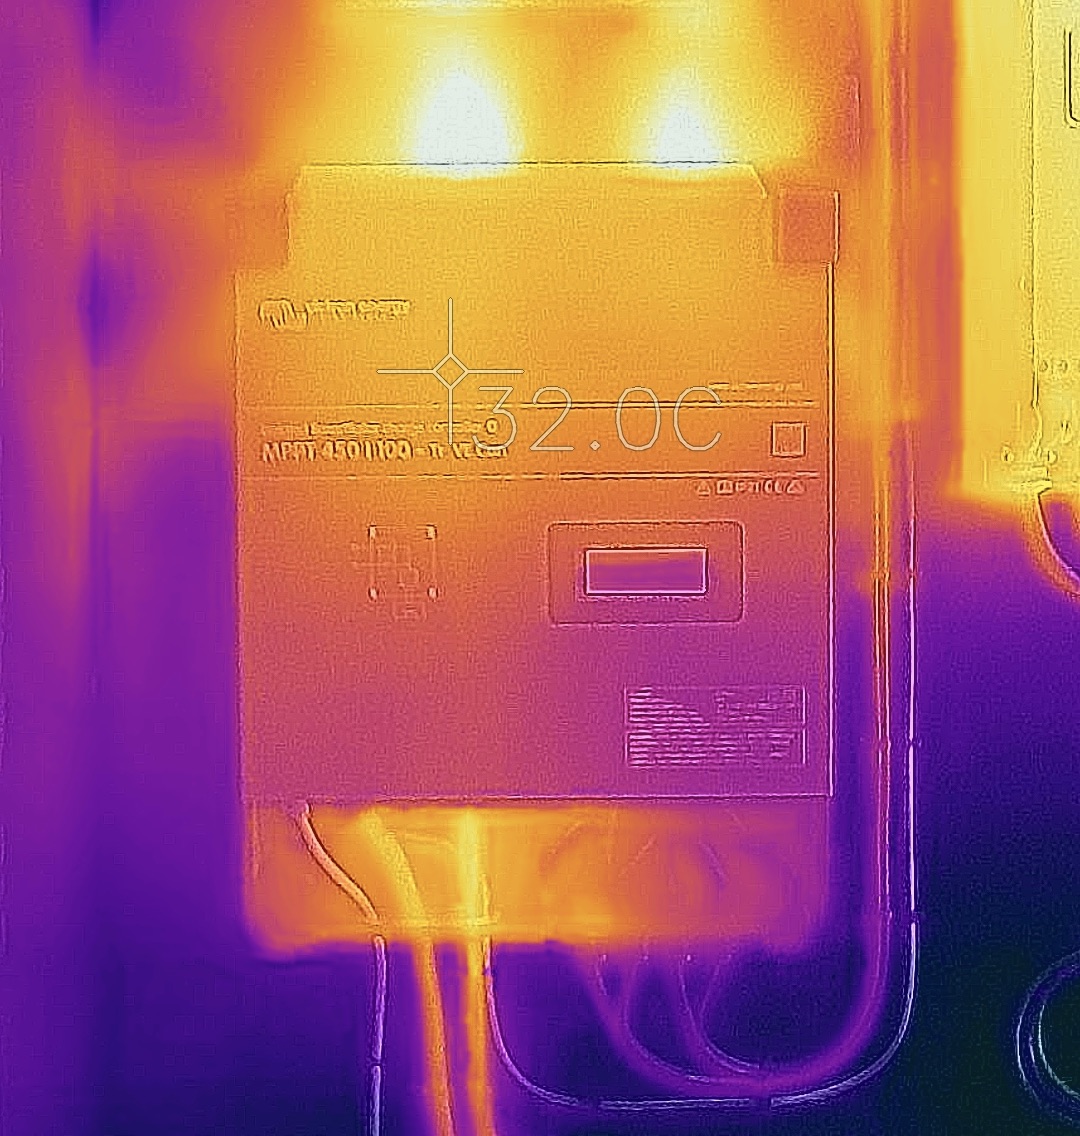 Thermal image of MPPT RS heat zones required for clearance.